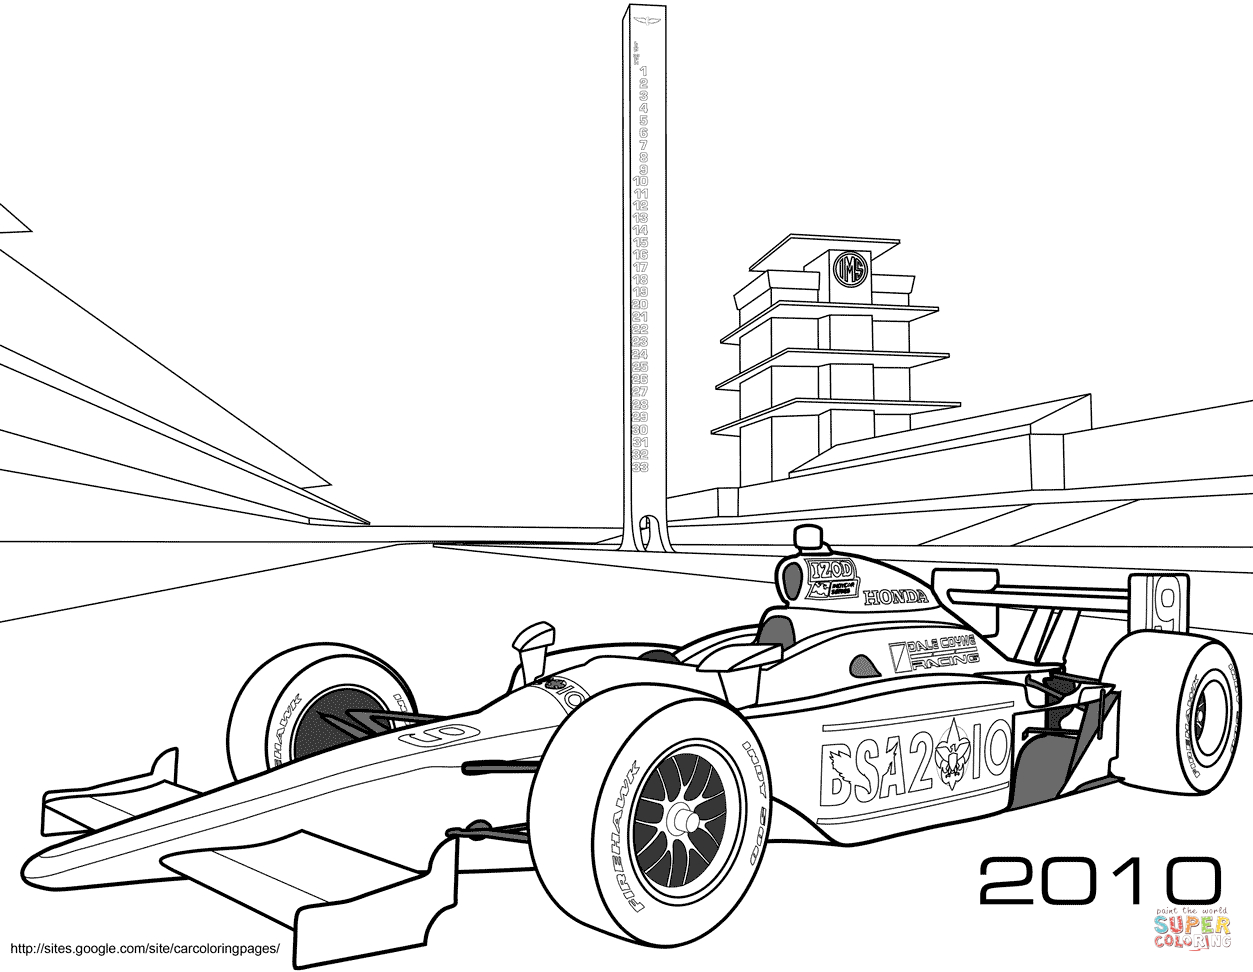 Coloring Page Of A Race Car Race Cars Coloring Pages Free Printable Pictures